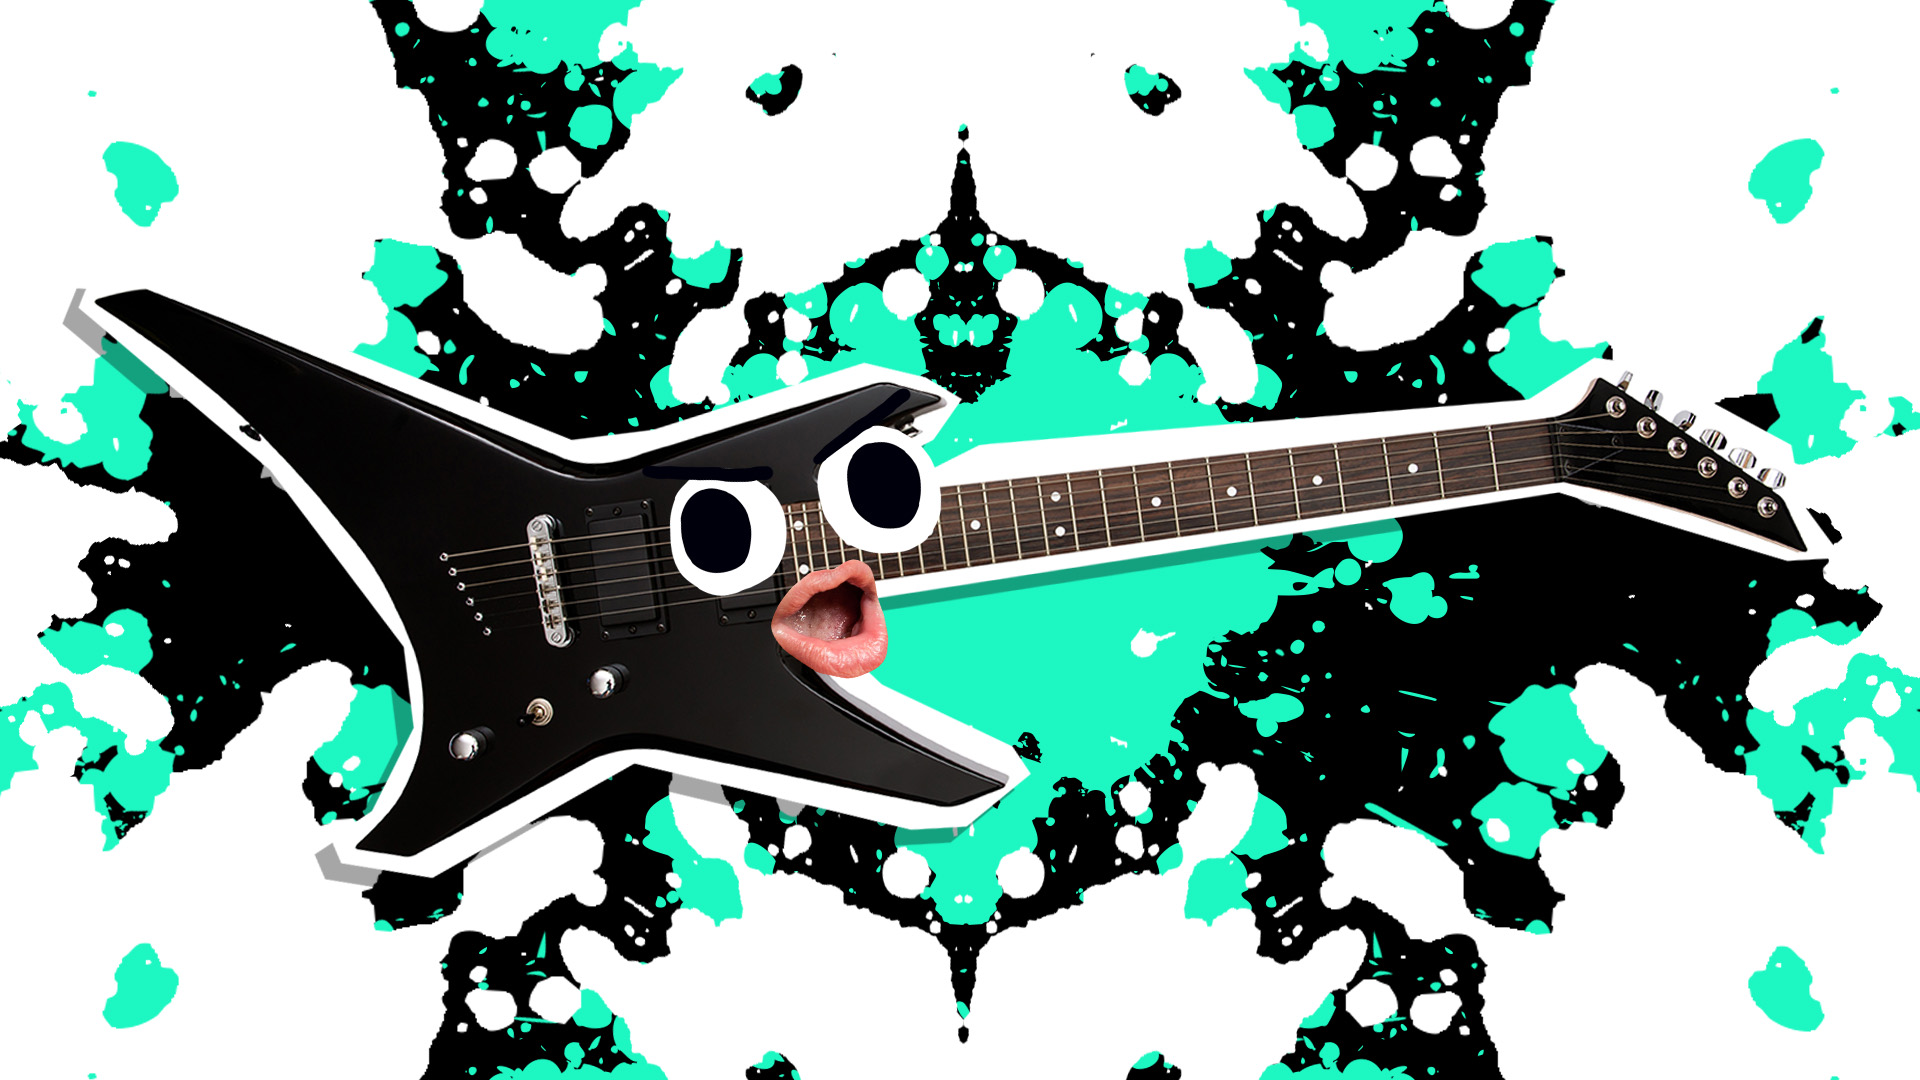 An awesome electric guitar